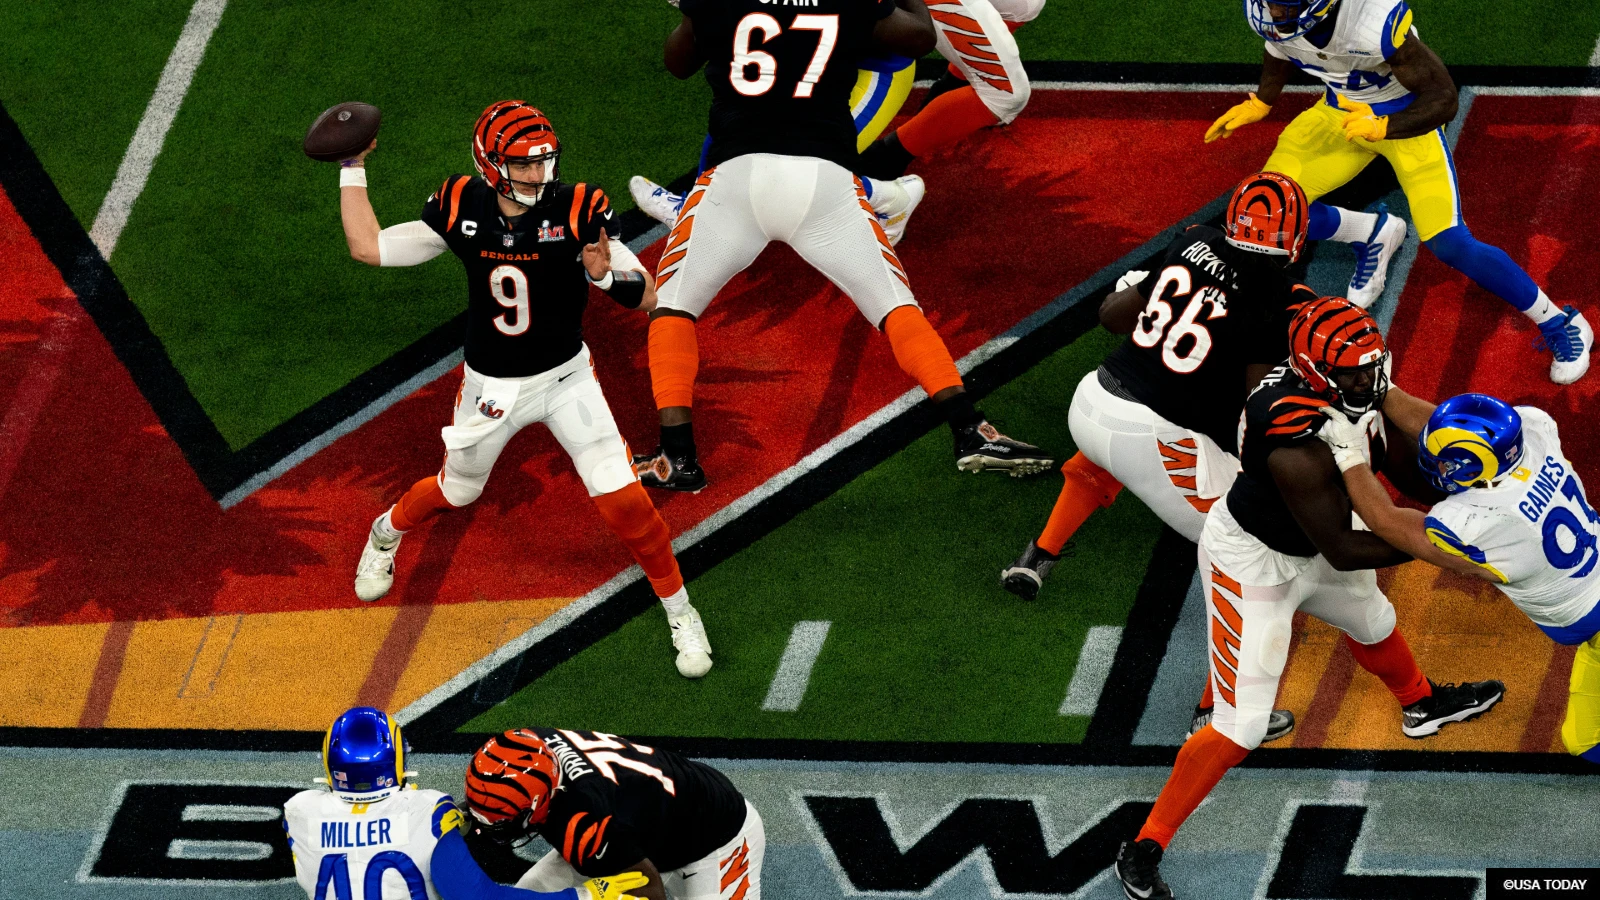 Photo: bengals odds to win super bowl